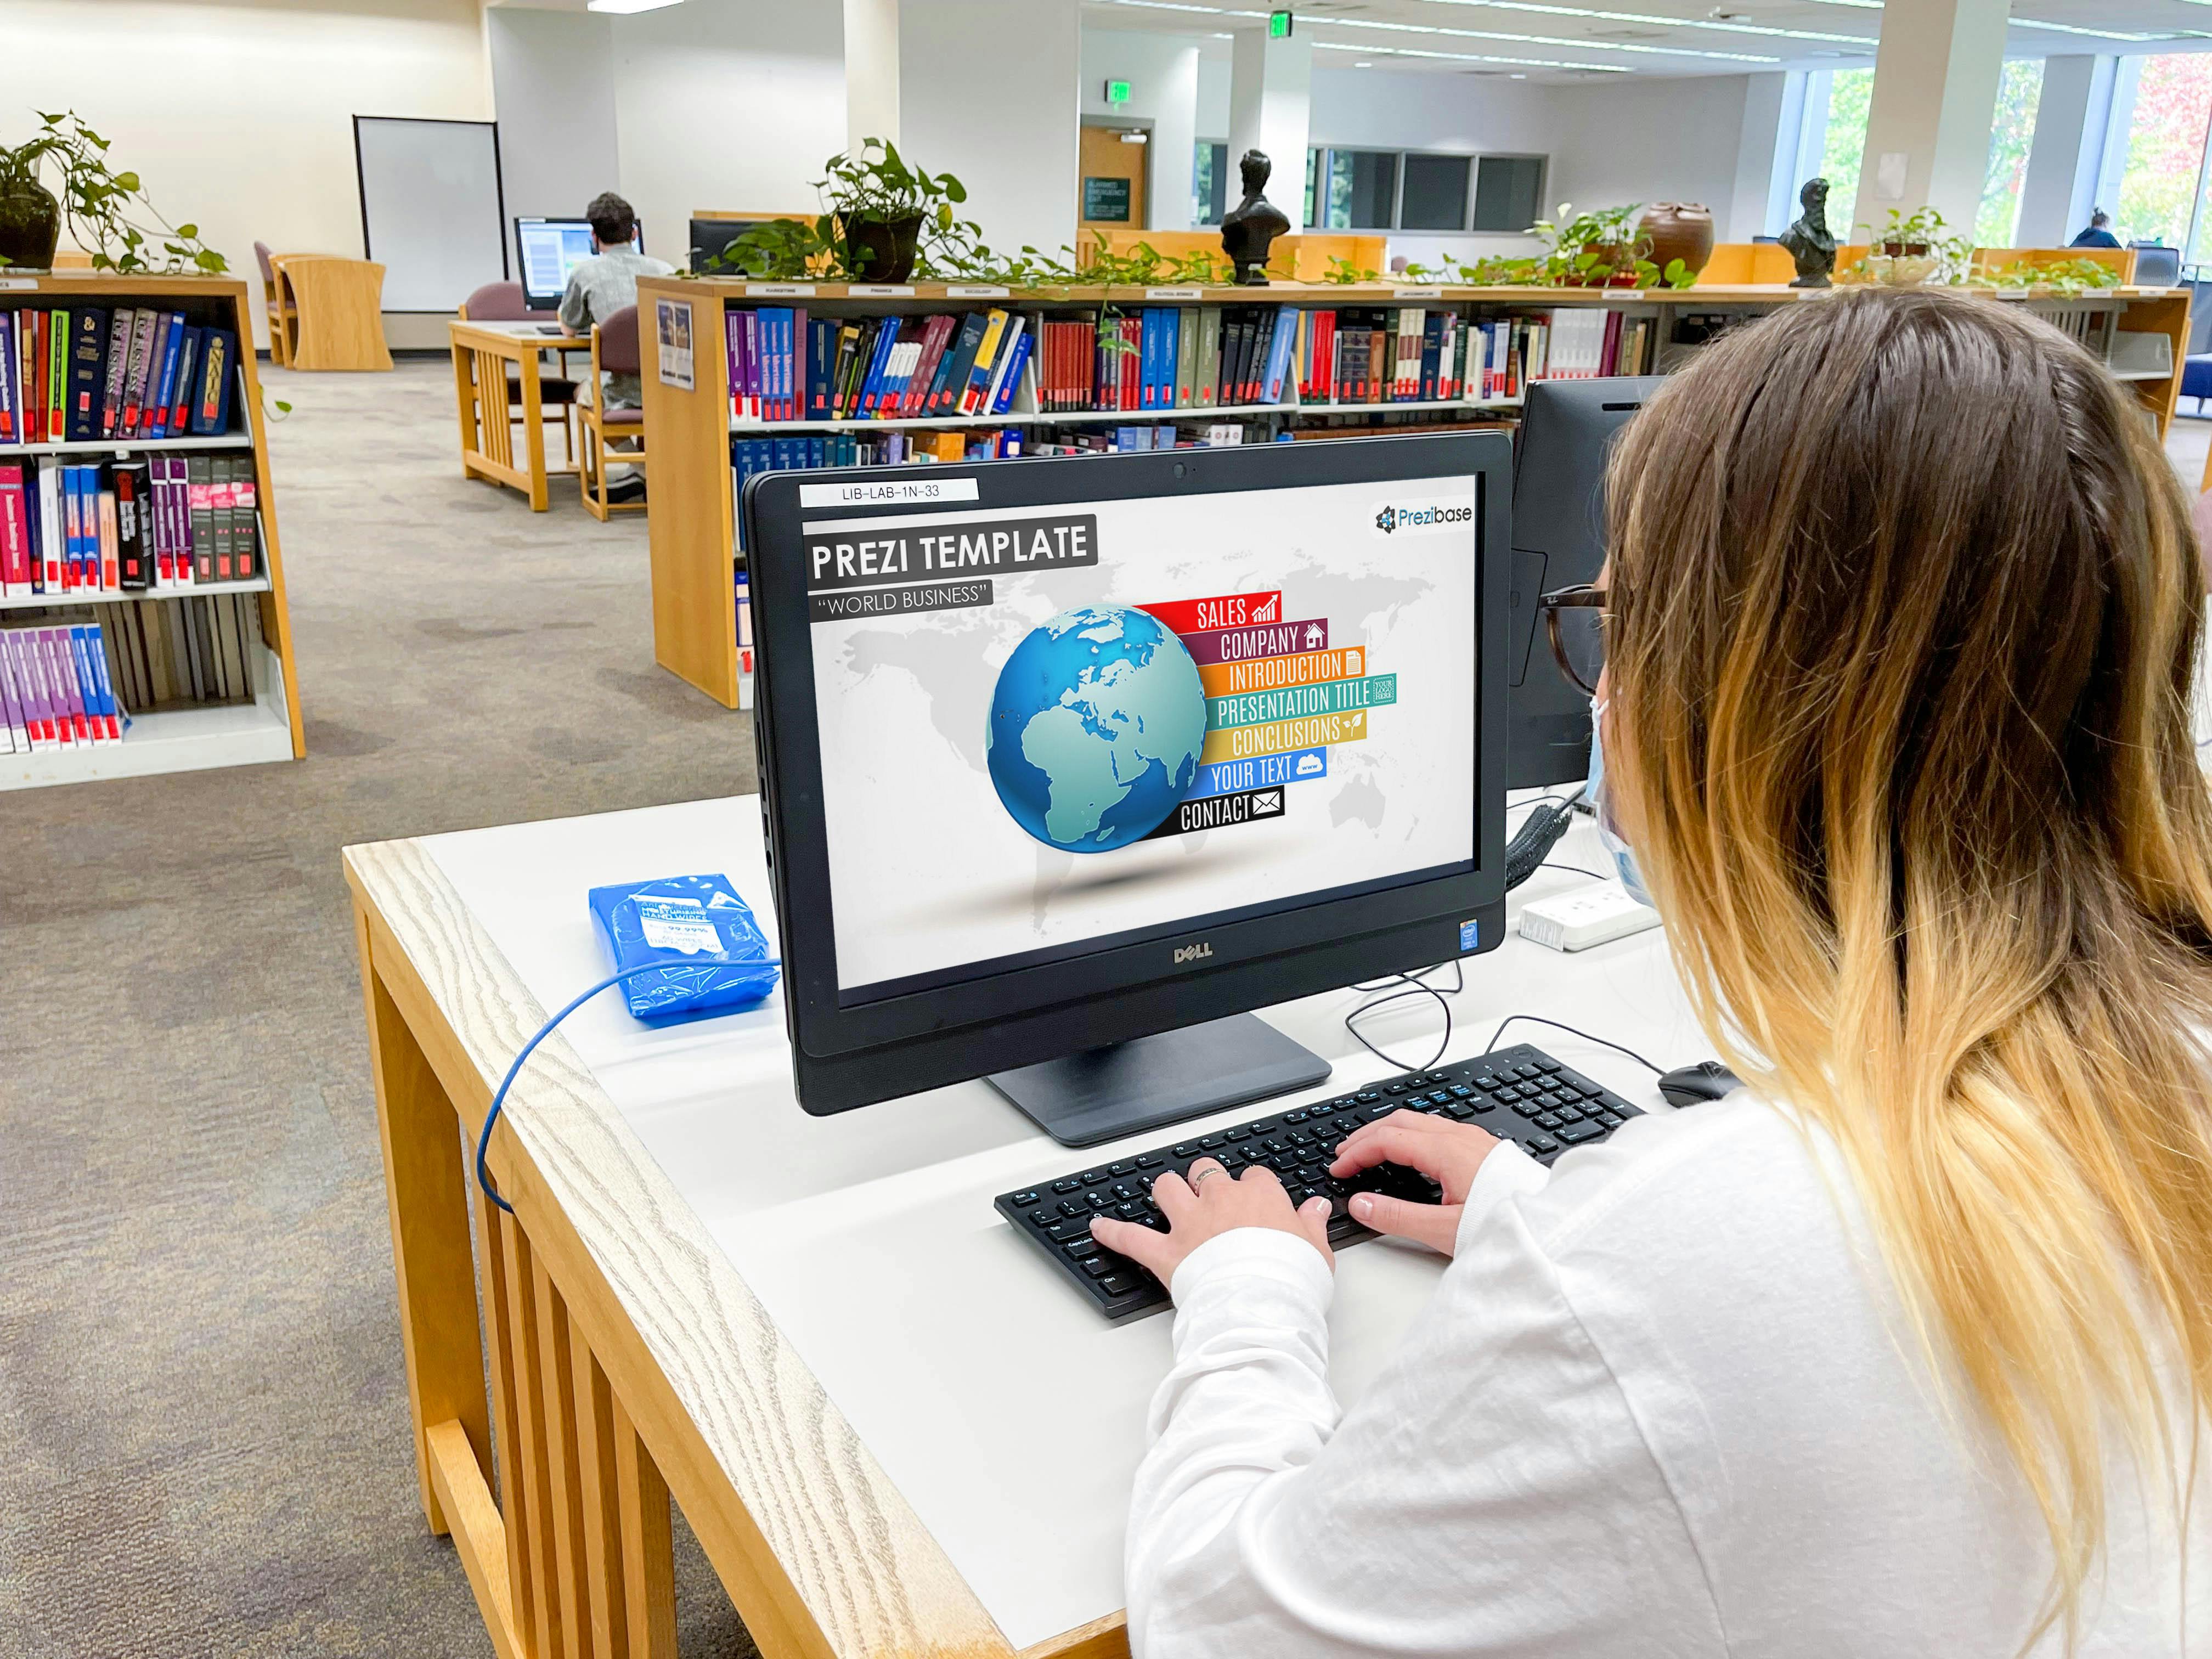 A college student sitting at computer in a library looking at the Prezi Template webpage.